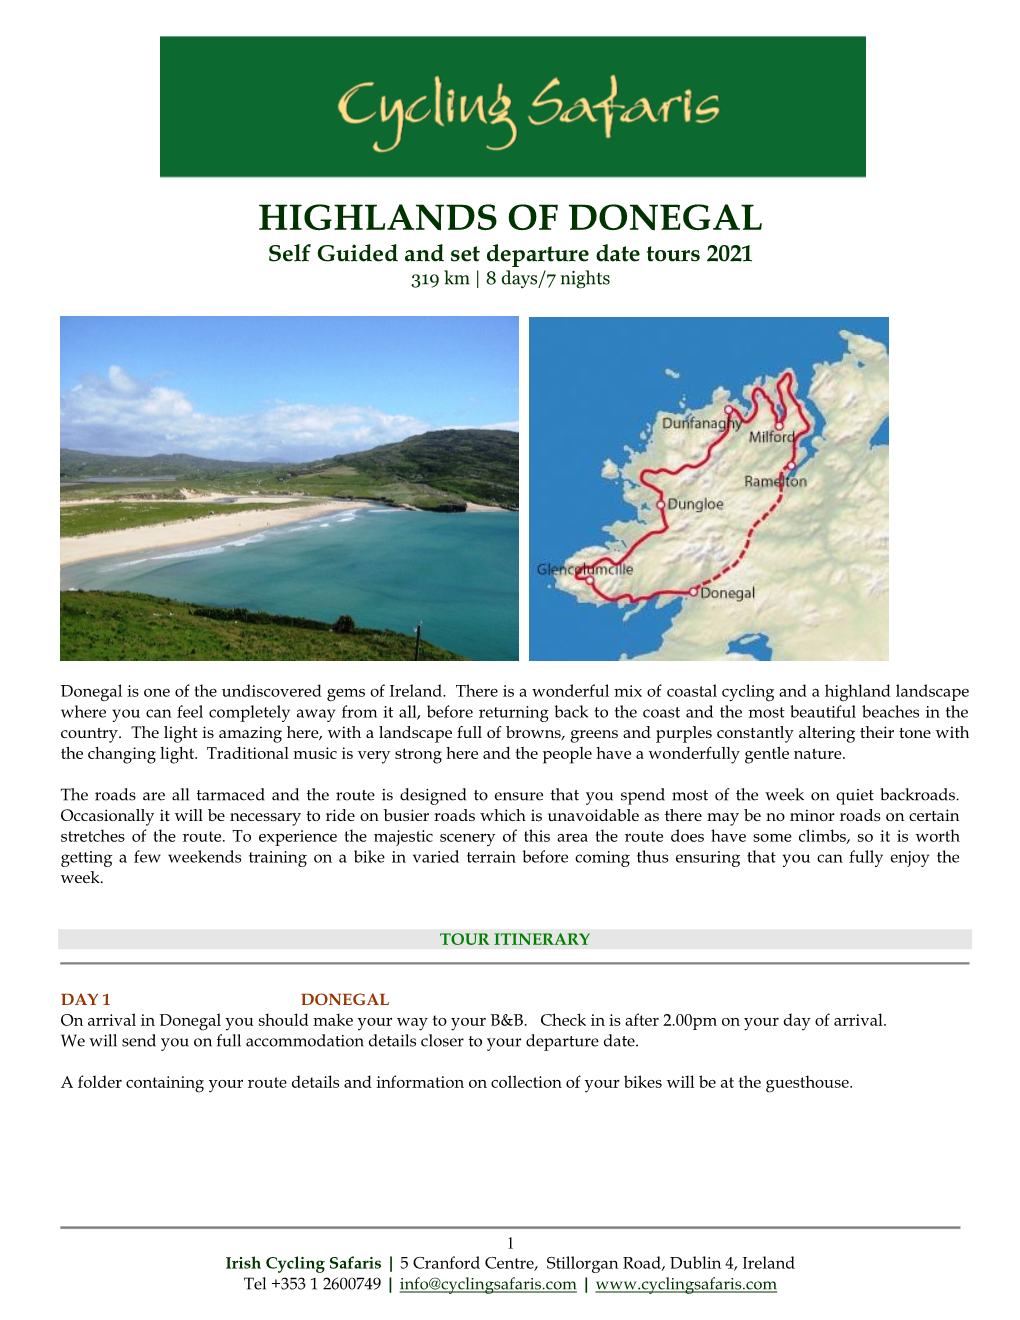 HIGHLANDS of DONEGAL Self Guided and Set Departure Date Tours 2021 319 Km | 8 Days/7 Nights